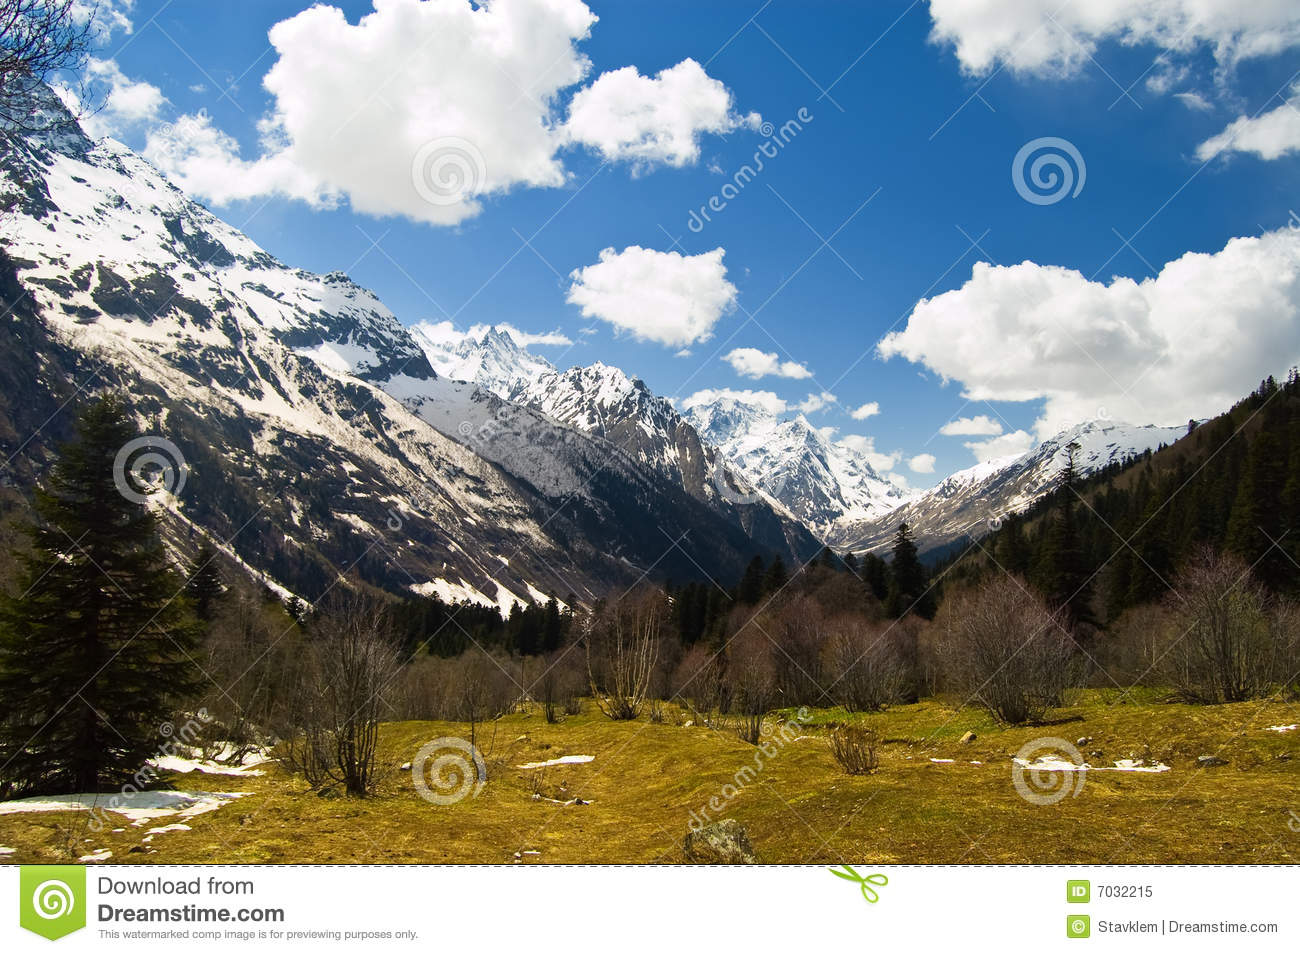 Abstract Mountain Background Royalty Free Stock Photo   Image  7032215